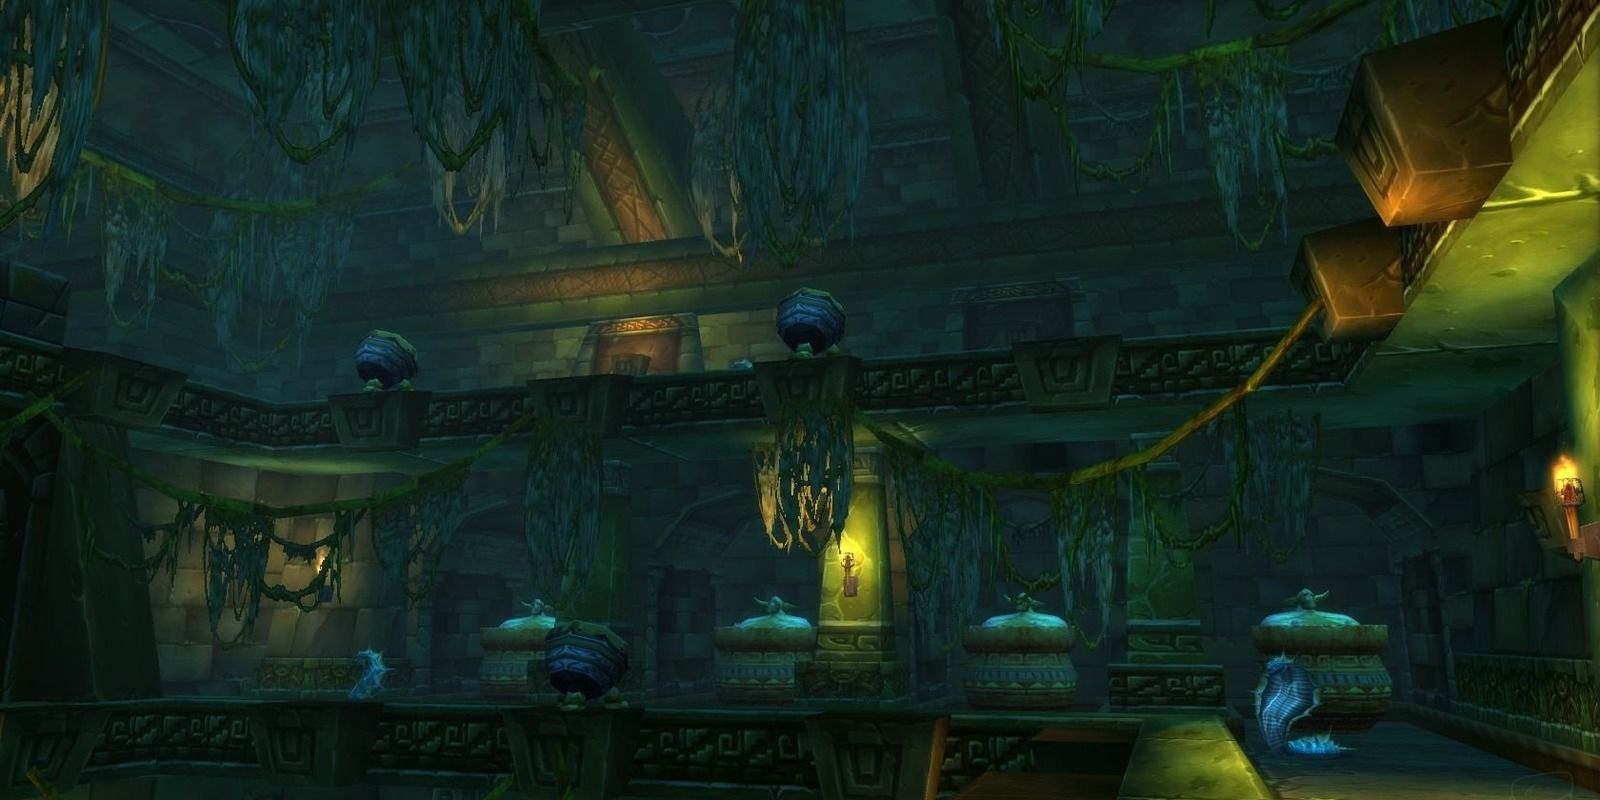 The interior of the Sunken Temple or Temple of Atal'hakkar in WoW Classic, with snakes and hanging vines.